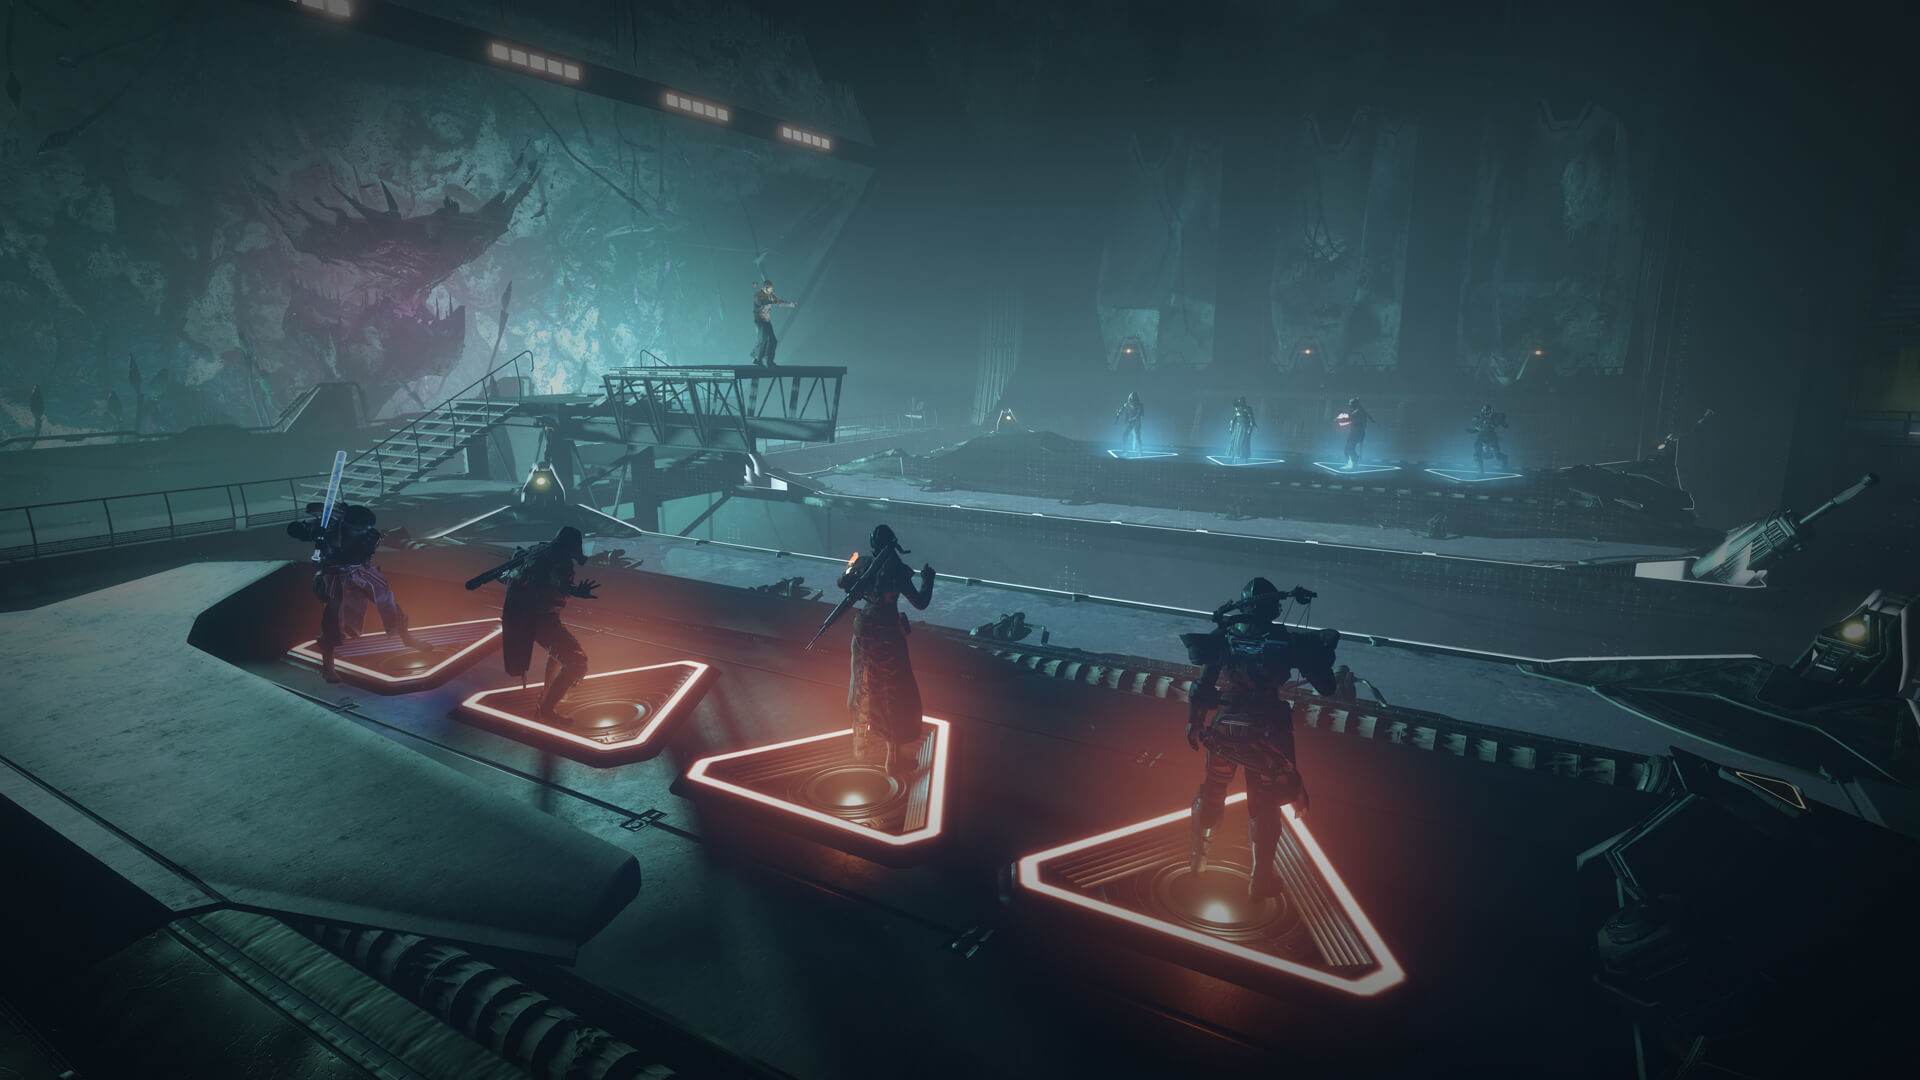 Square off against a team of 4 guardians in the new "Gambit" mode